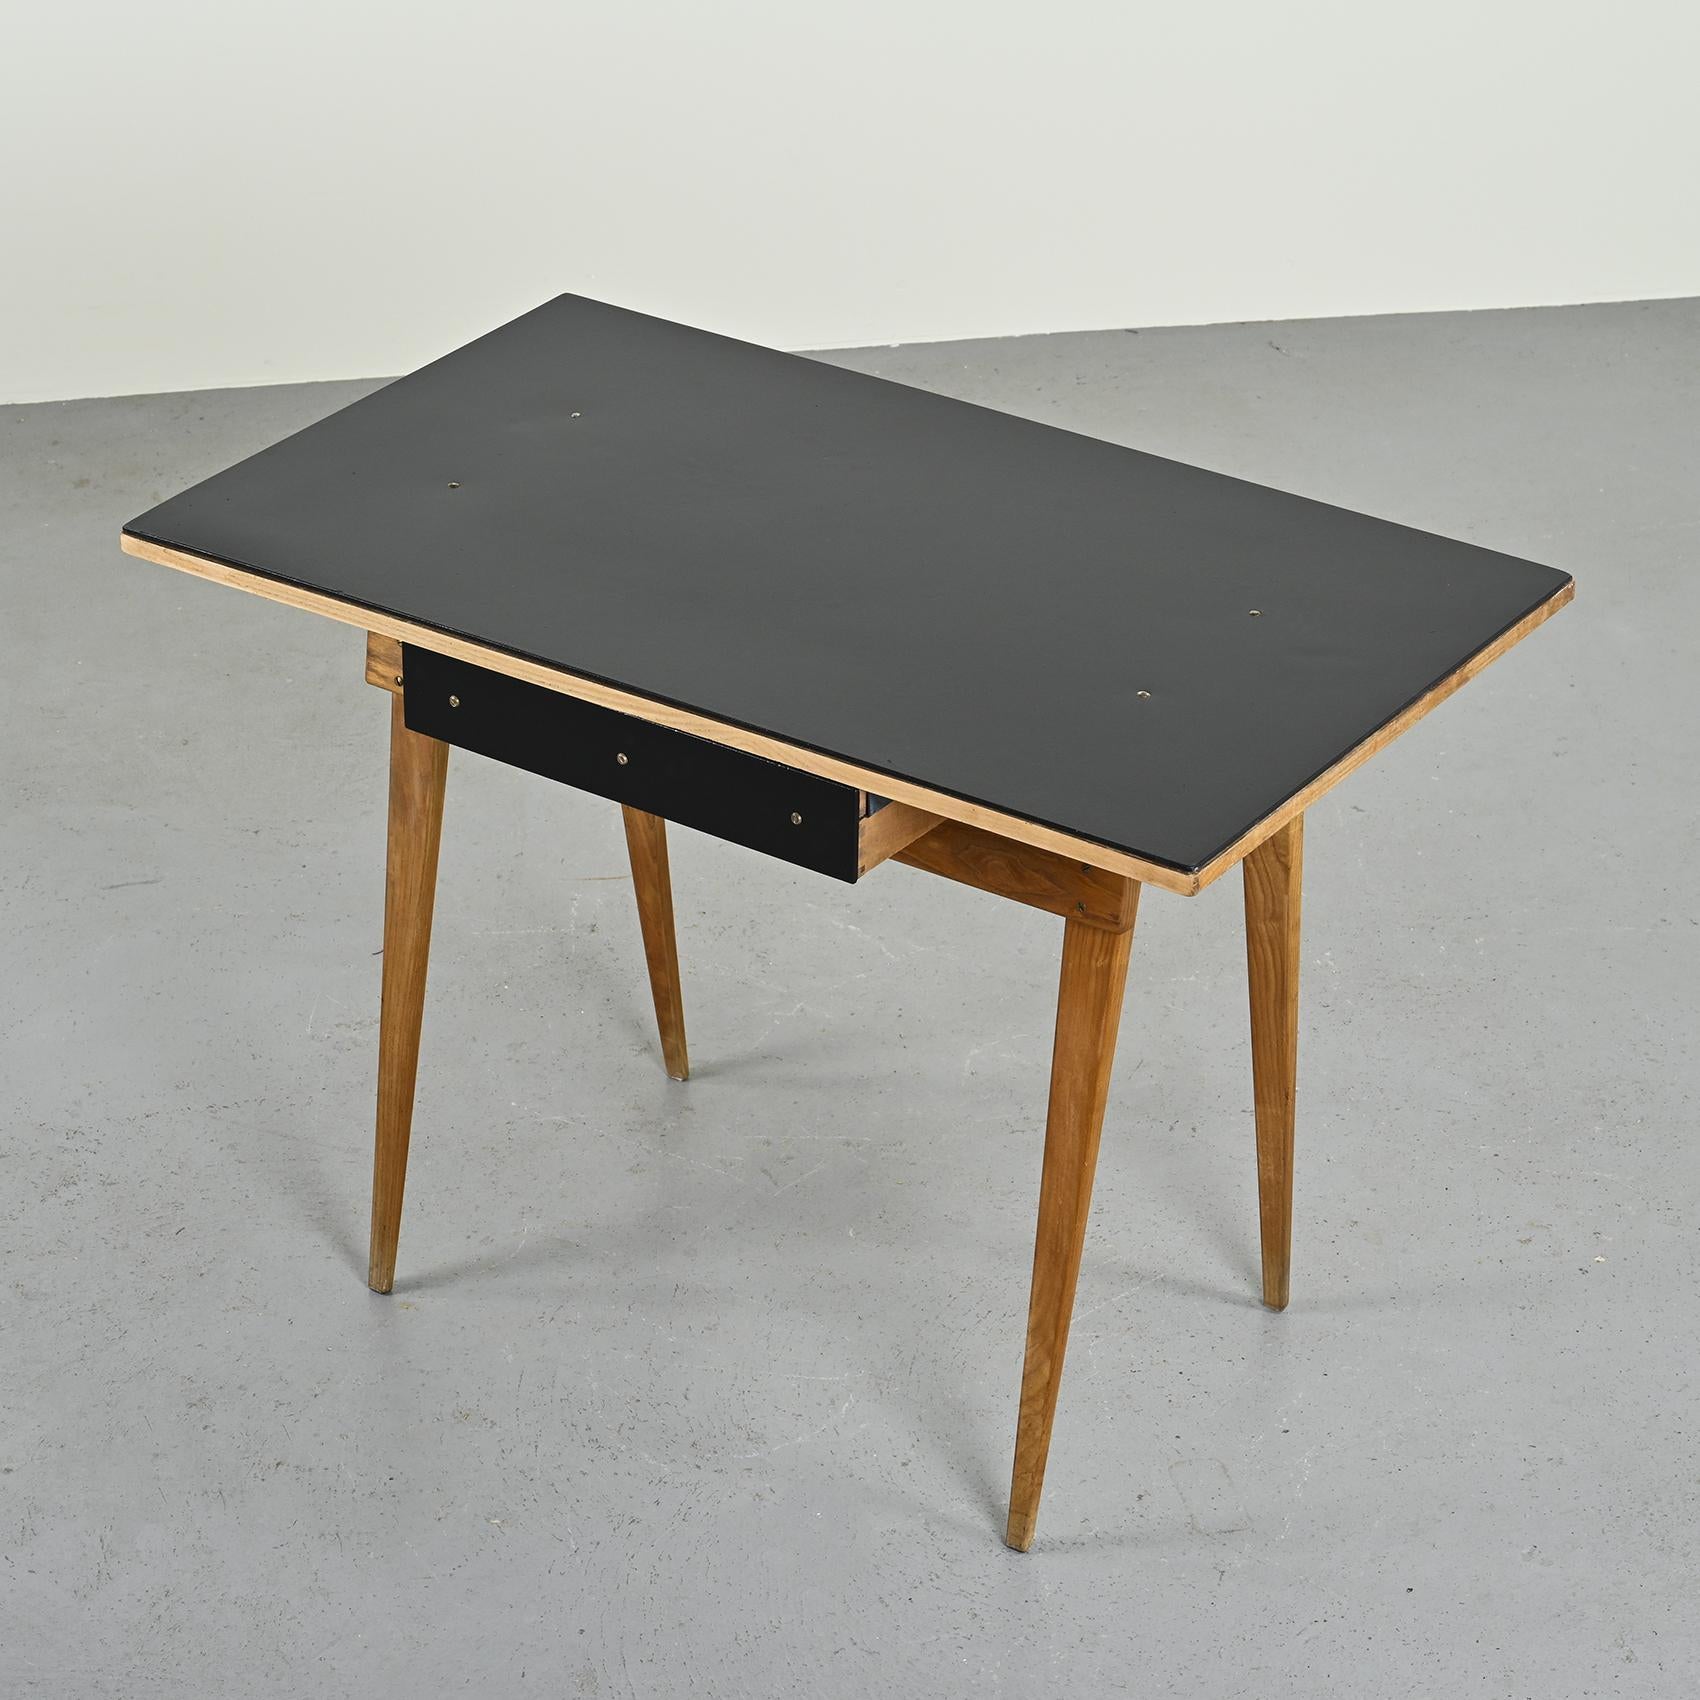 Rare high desk or console  by André Sornay, cabinetmaker, painter and designer from Lyon.

Composed of two inverted U-shaped legs on which a black lacquered top rests and accommodates a central storage drawer. A fine example of 